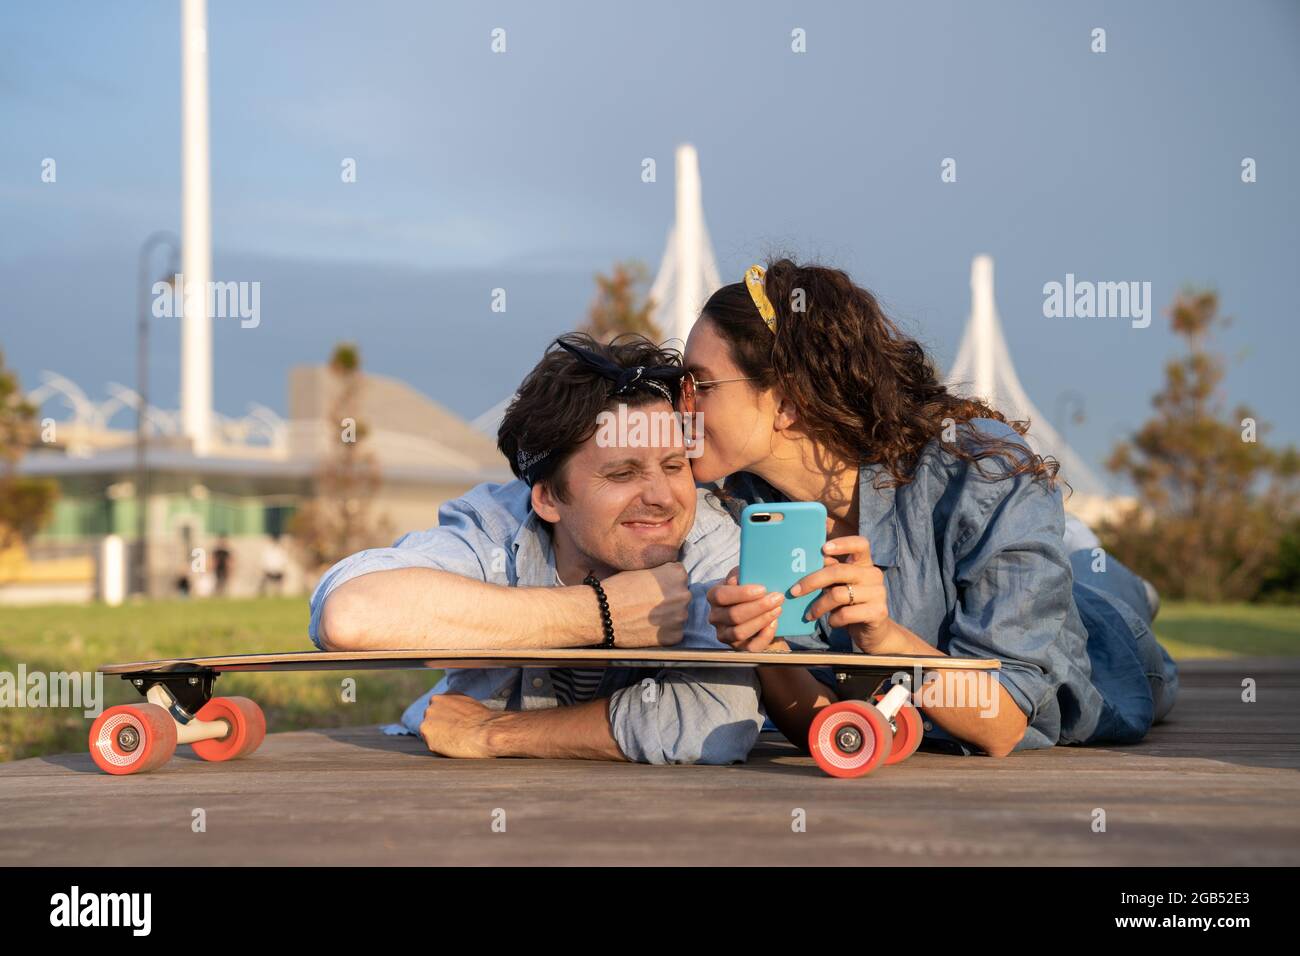 Stylish young couple in love lying on skateboard outdoors looking at smartphone chilling at sunset Stock Photo